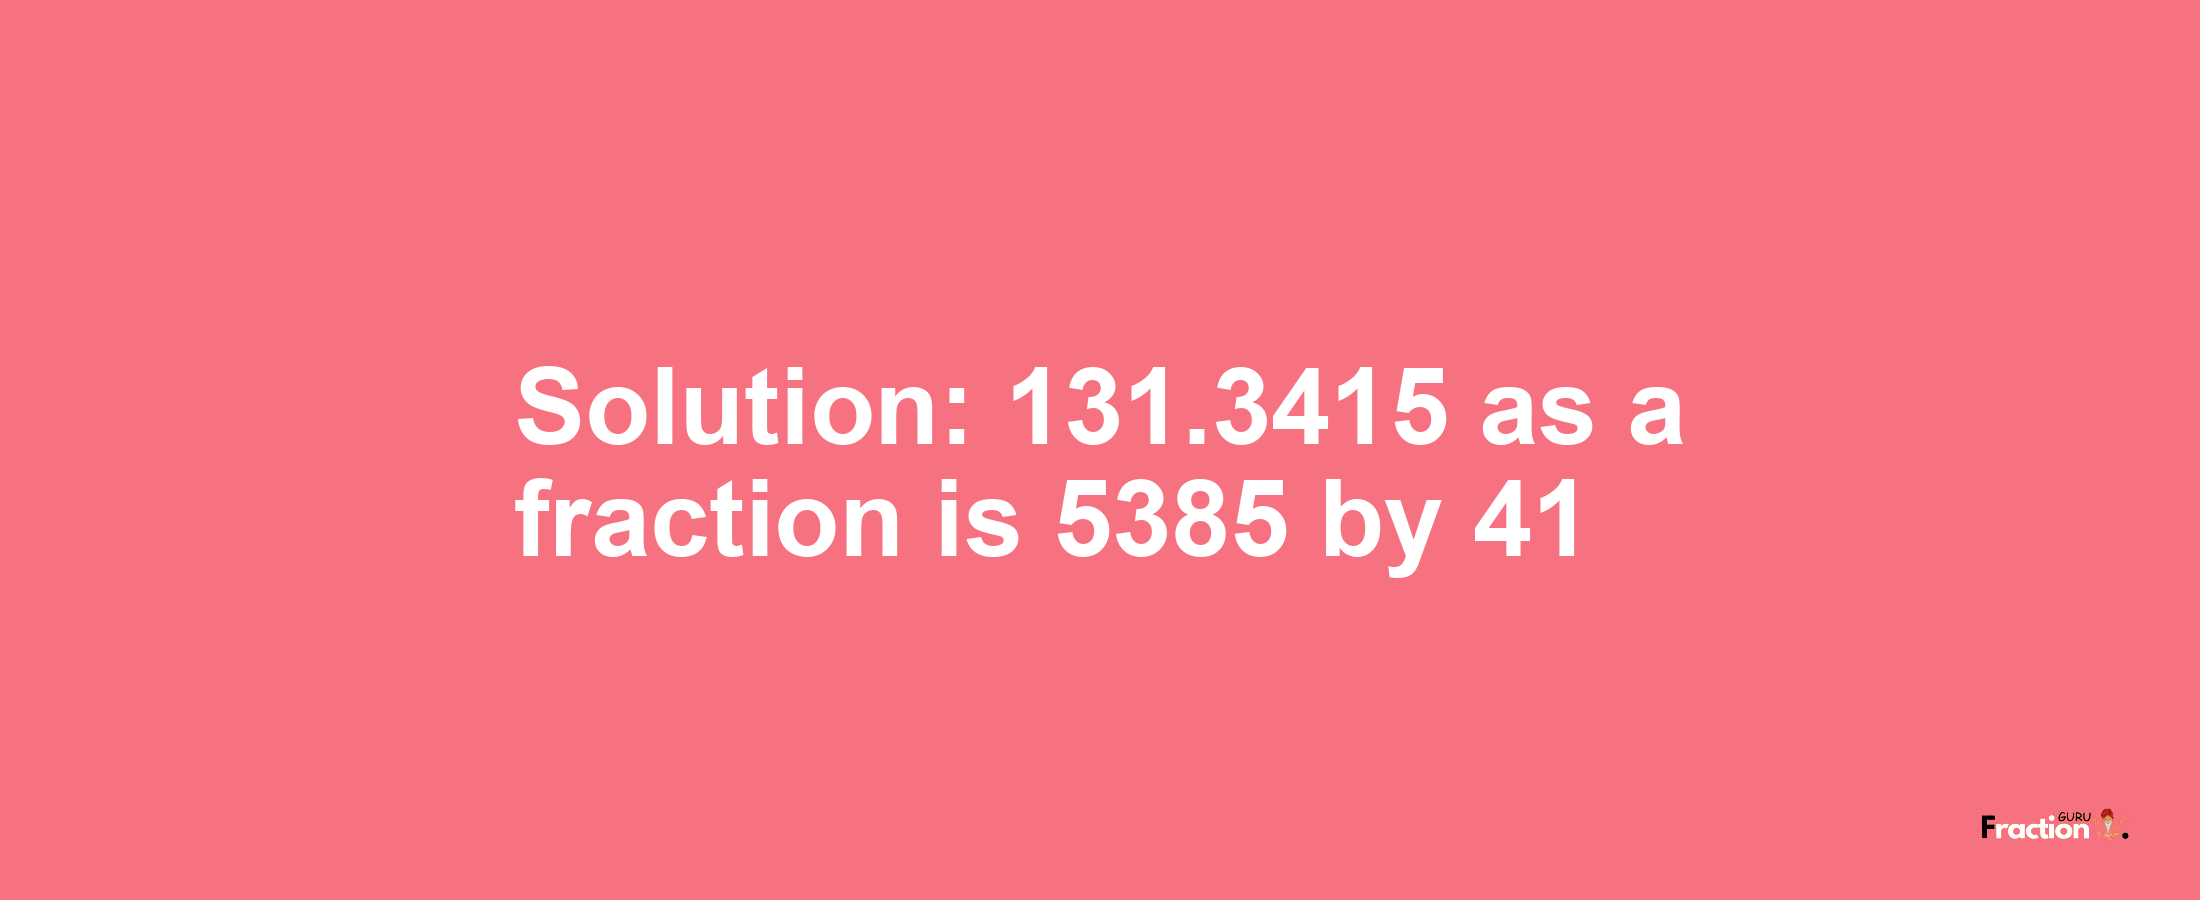 Solution:131.3415 as a fraction is 5385/41